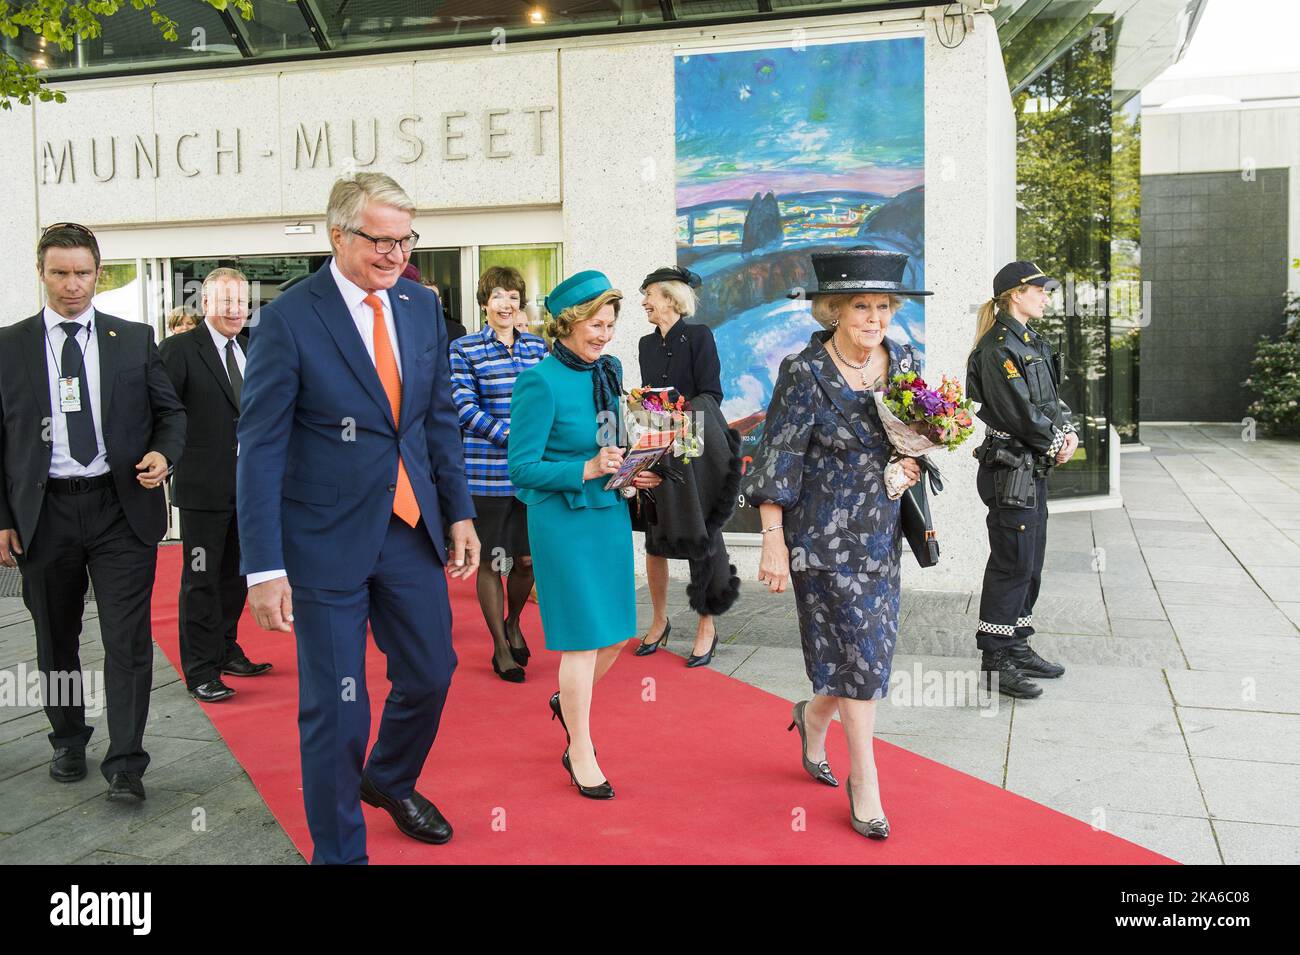 Oslo May 09, 2015. Queen Sonja of Norway and Princess Beatrix of the Netherlands, escorted by Oslo Mayor Fabian Stang, attend the opening of an exhibition pairing the works of artists Edvard Munch and Vincent van Gogh at the Munch Museum in Oslo. Phot by Fredrik Varfjell, NTB scanpix  Stock Photo